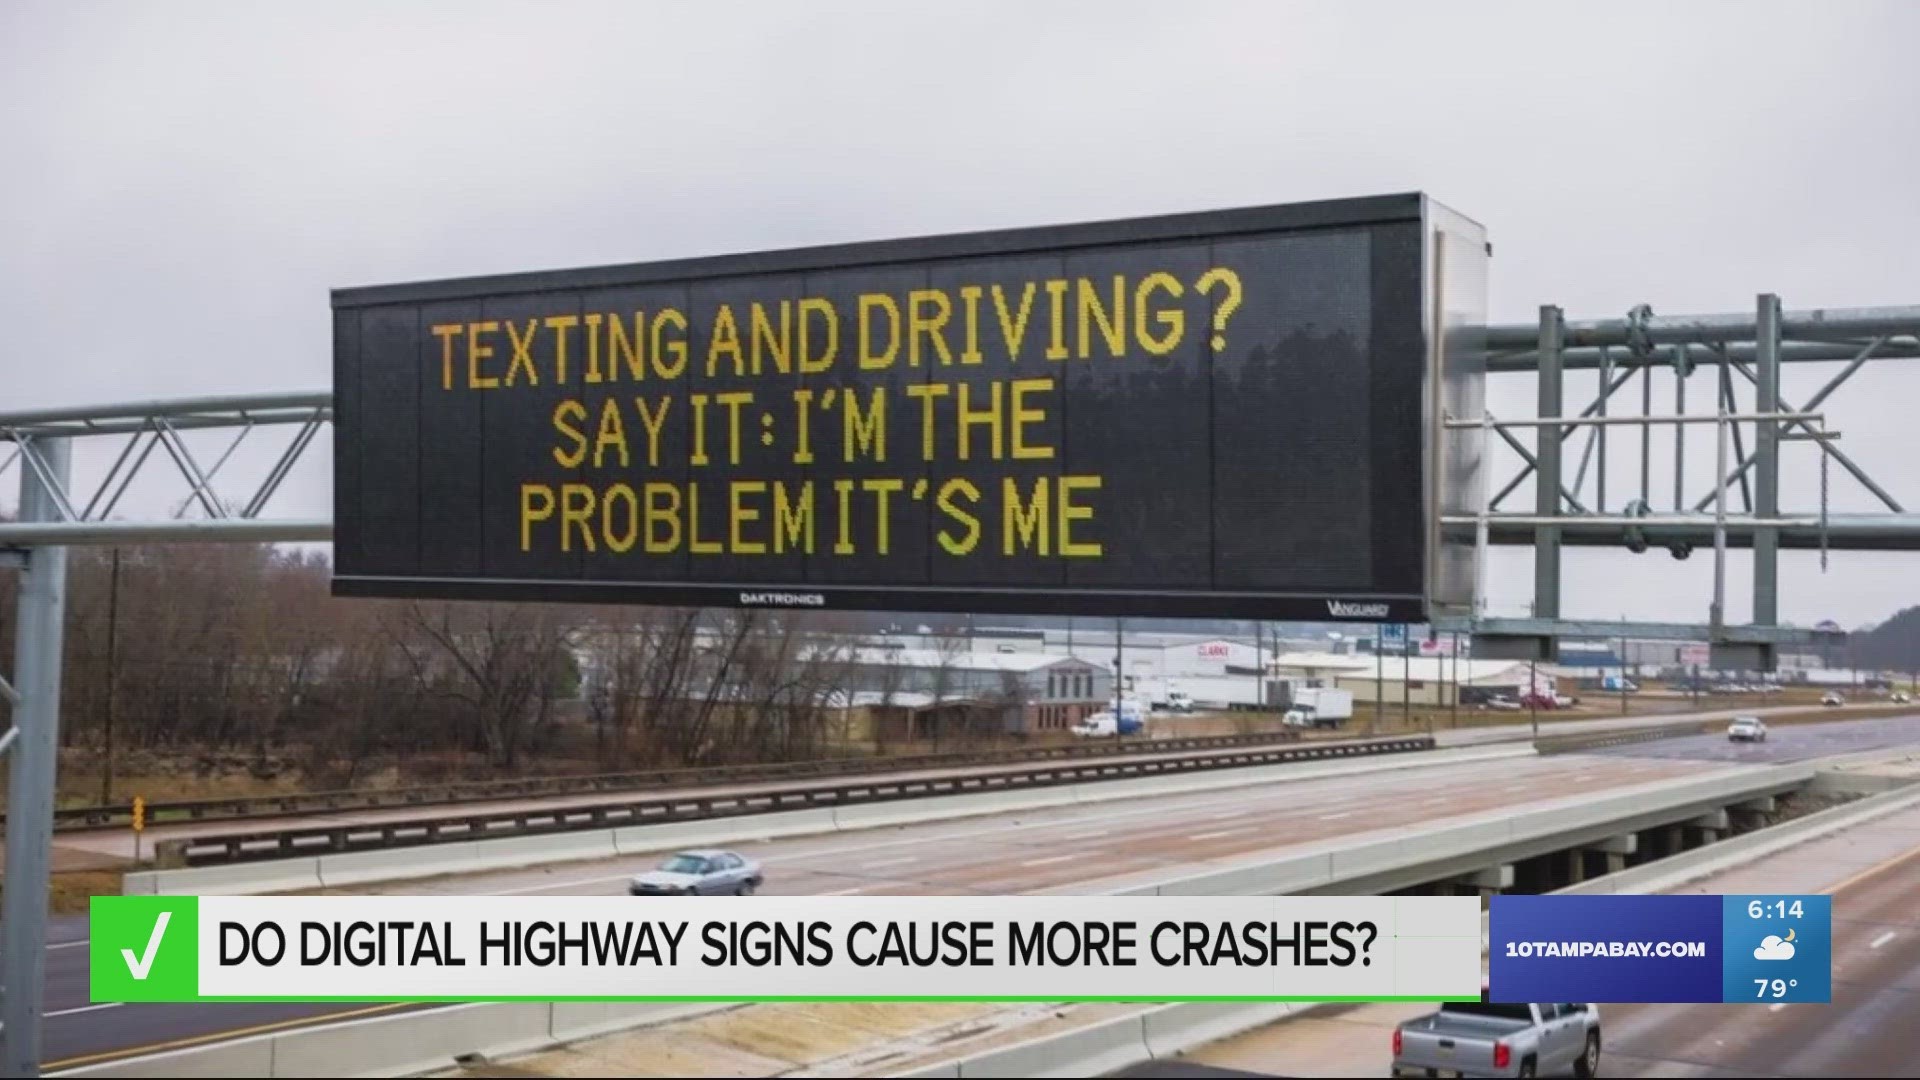 Overall research is limited, but at least one study found certain messages increased crashes. Federal regulators also have tried to reign in sign usage.